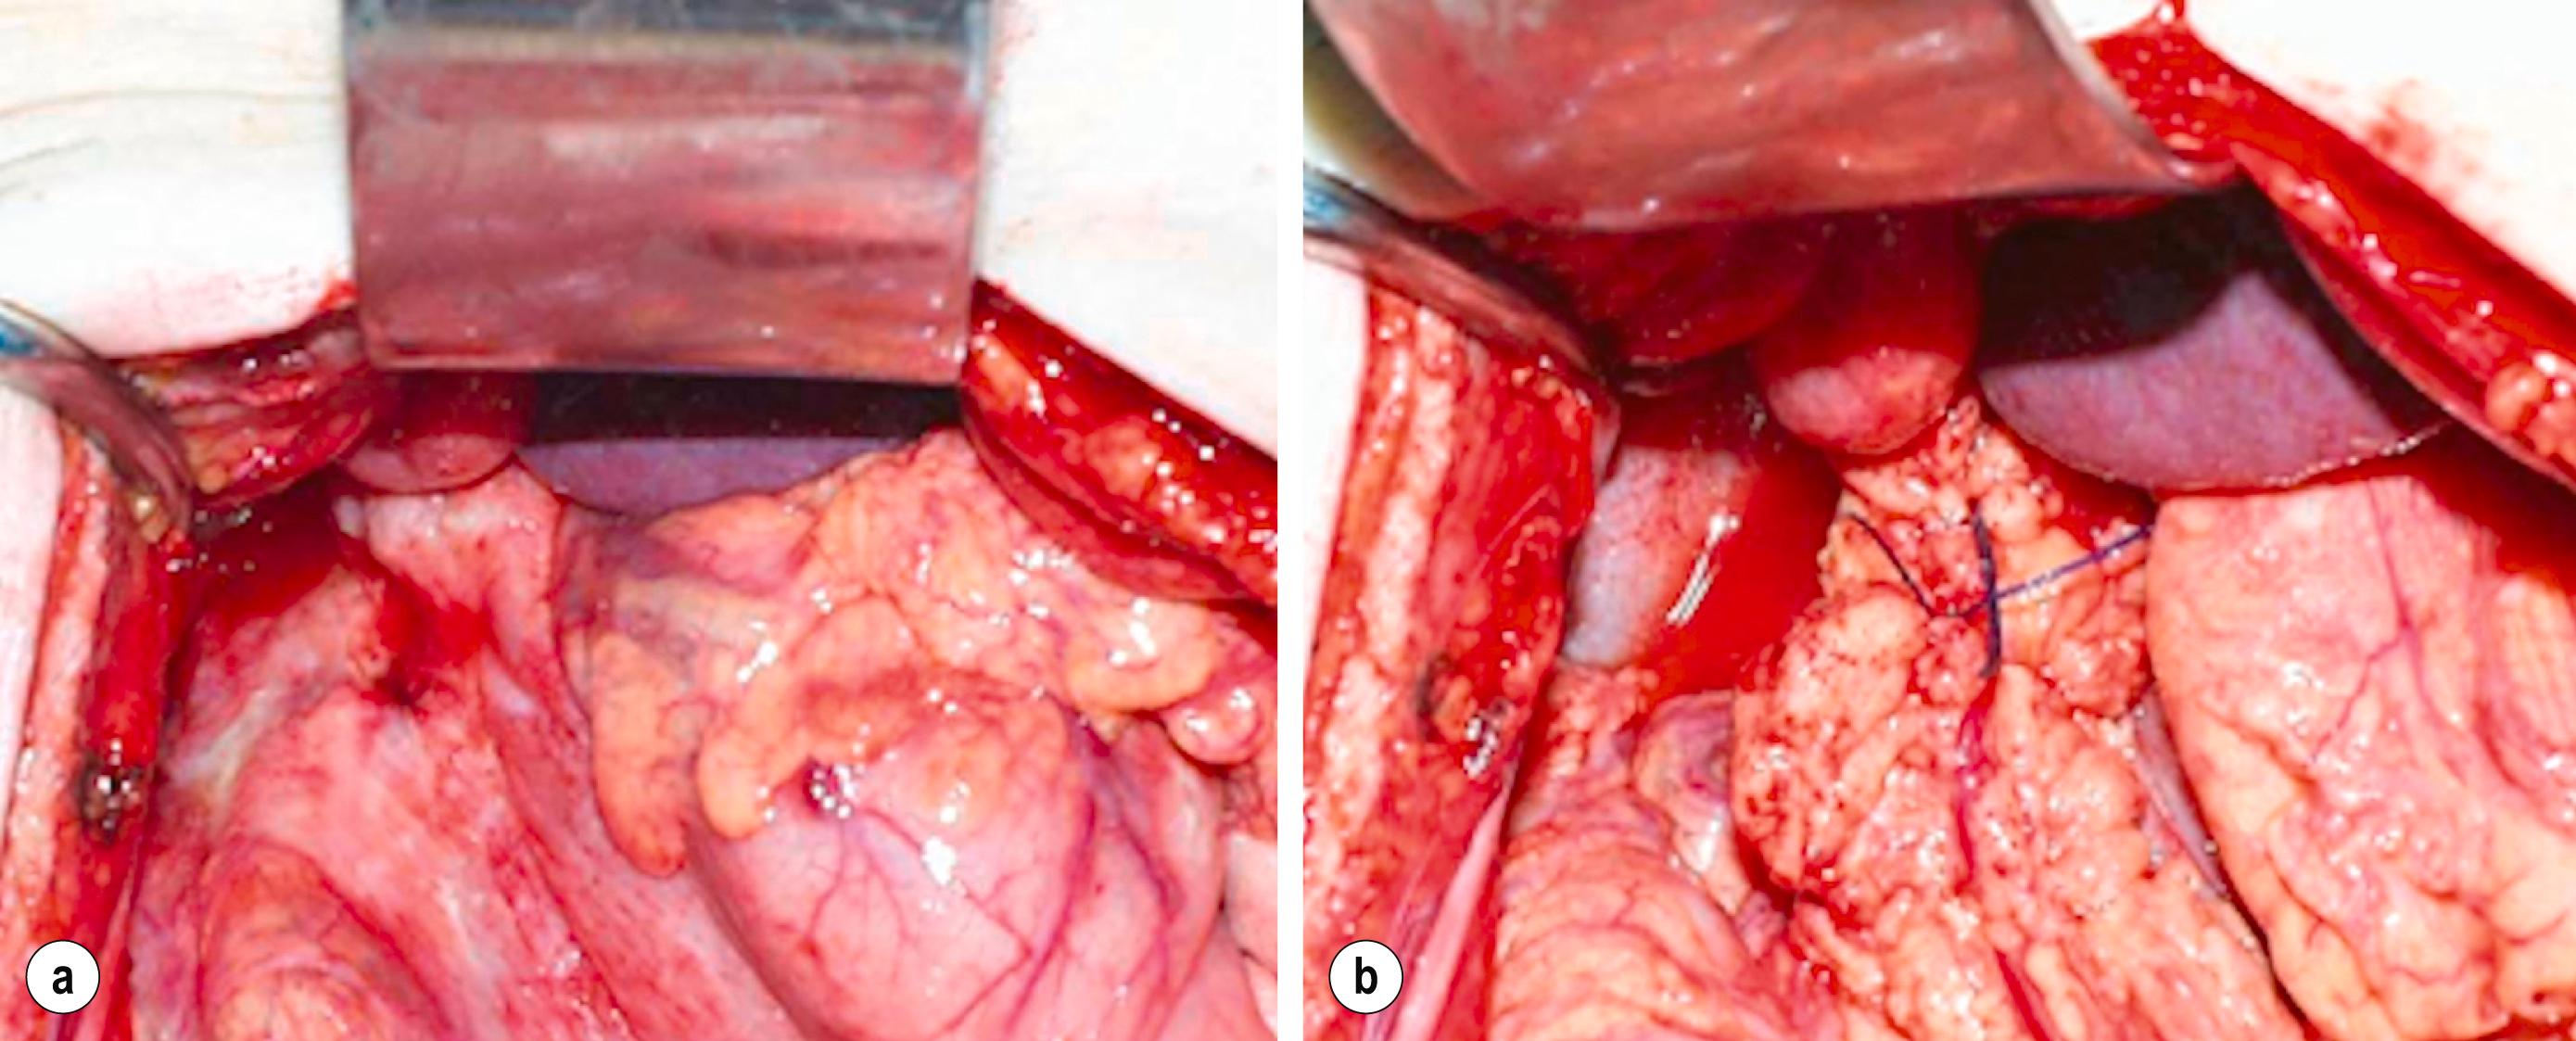 Figure 12.2, (a) A small perforation at the juxtapyloric area. (b) Pedicle omental patch repair on the perforation site secured with absorbable sutures.